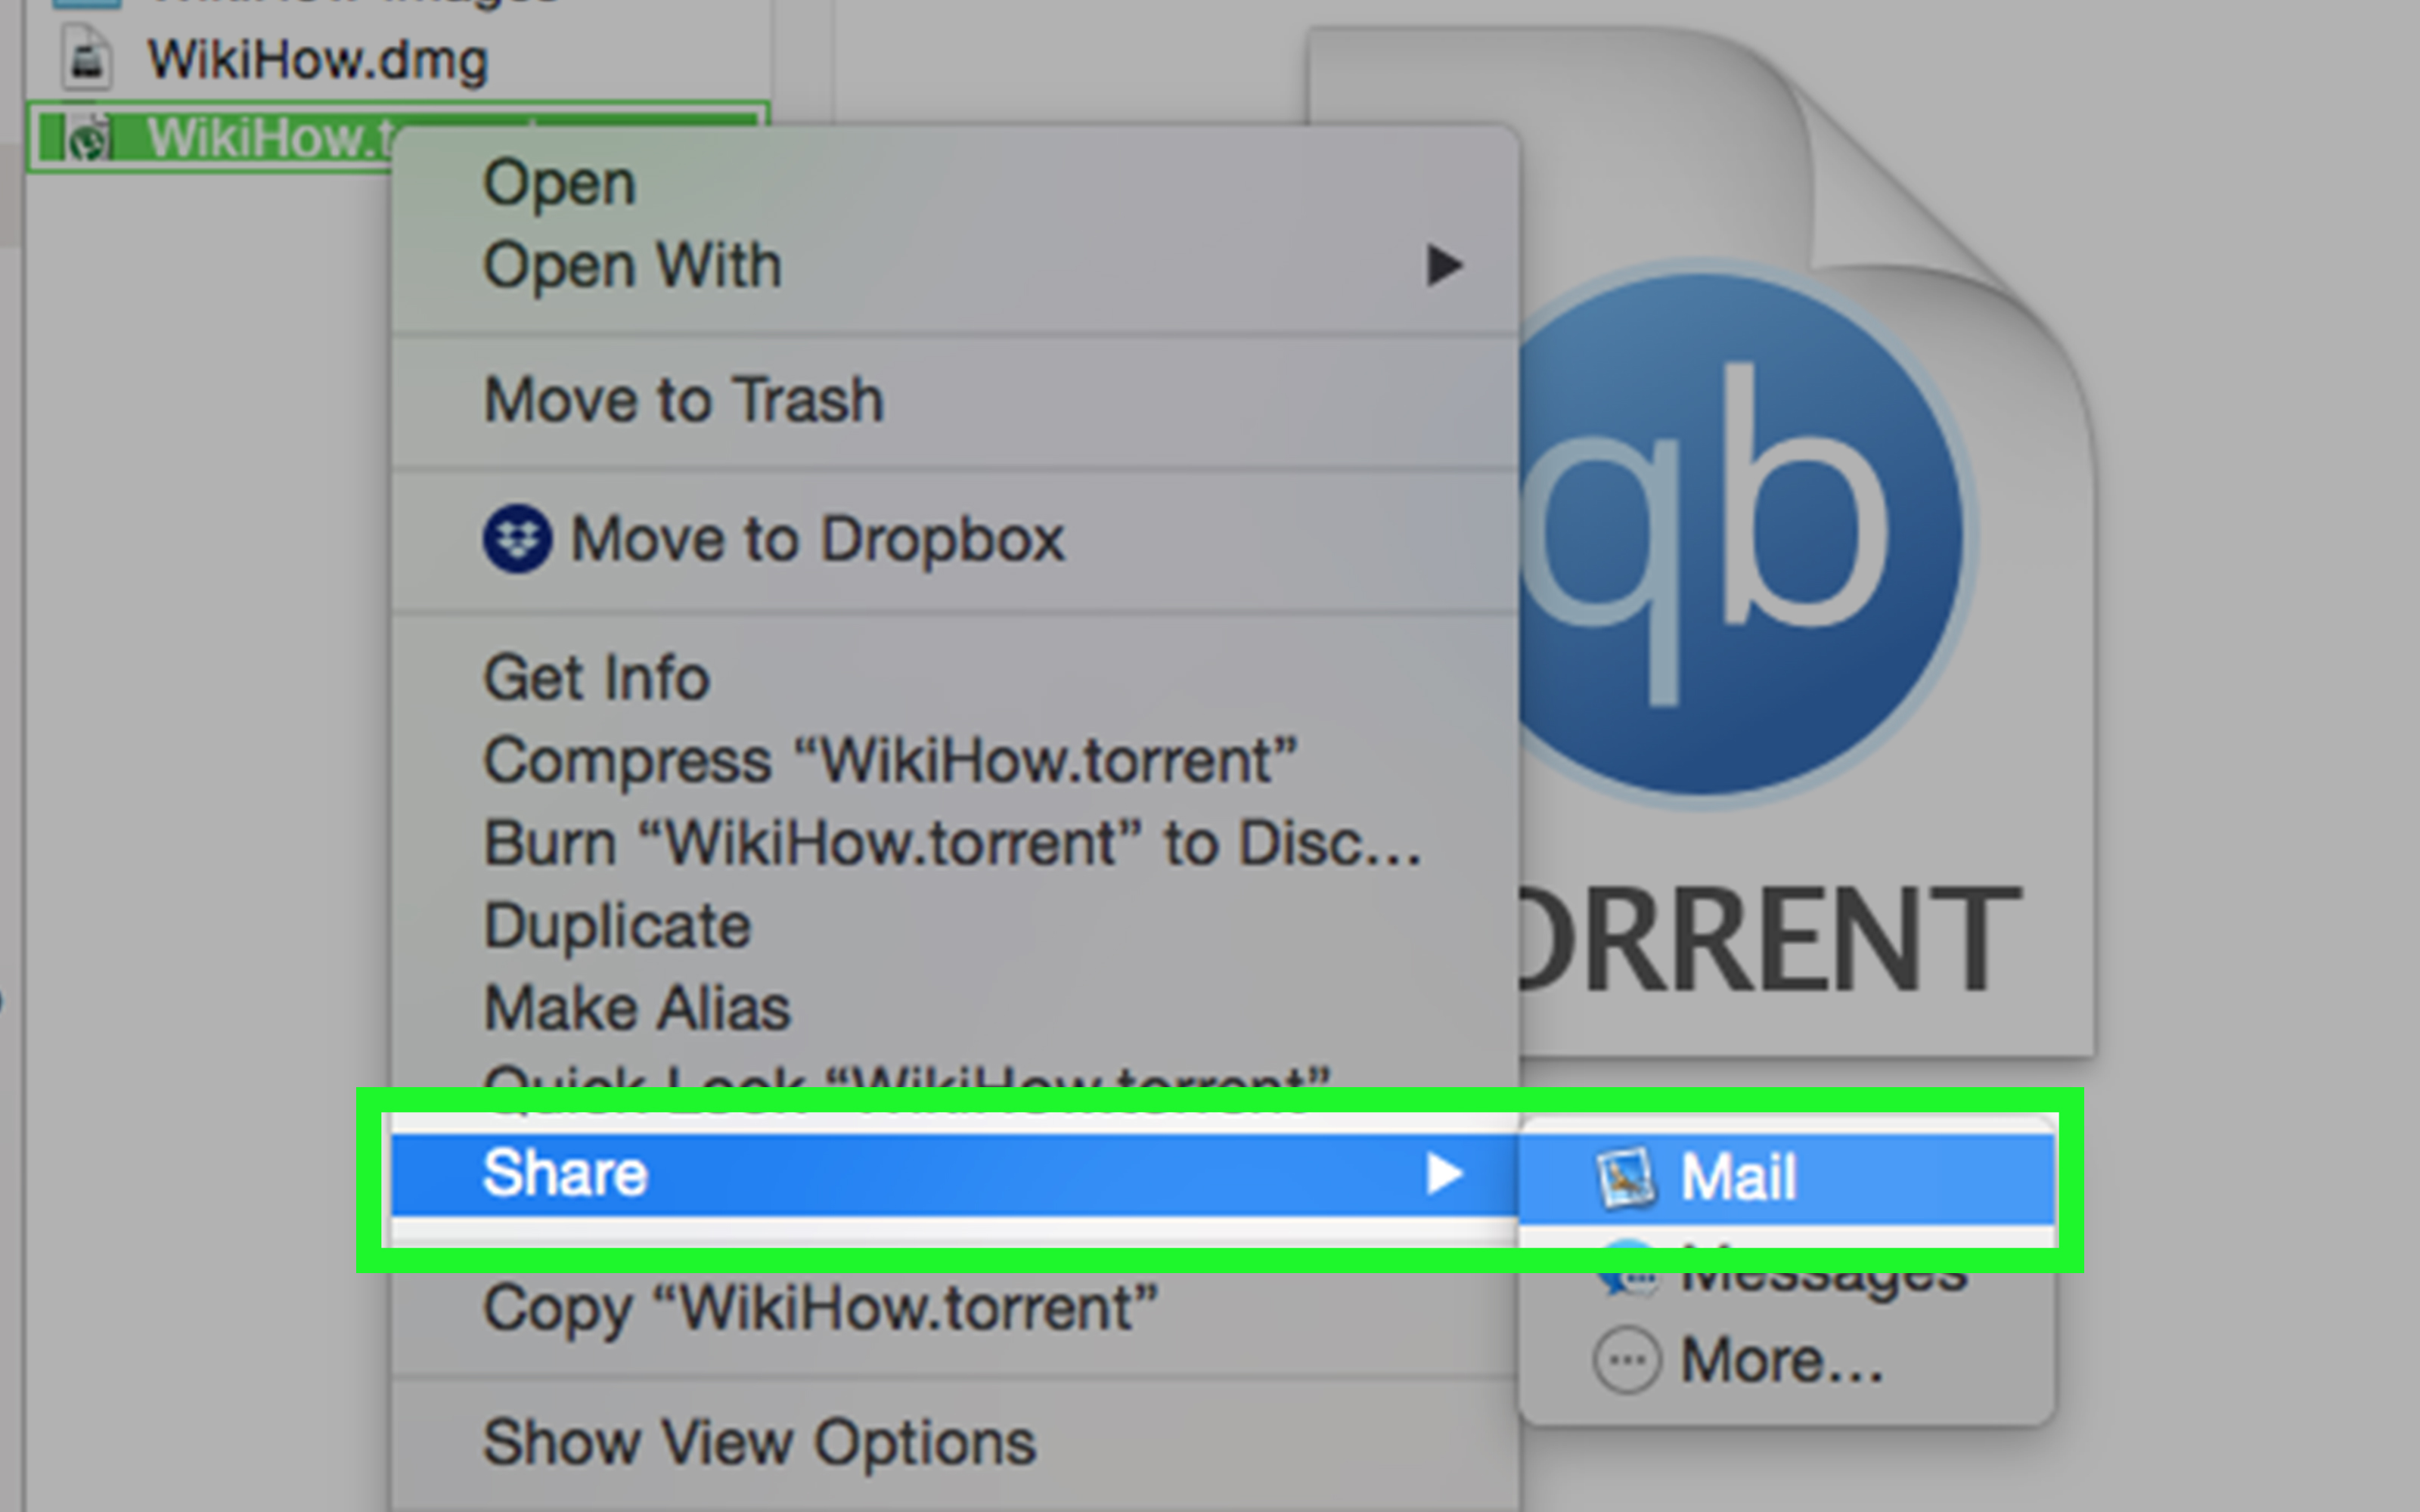 open a torrent file on mac